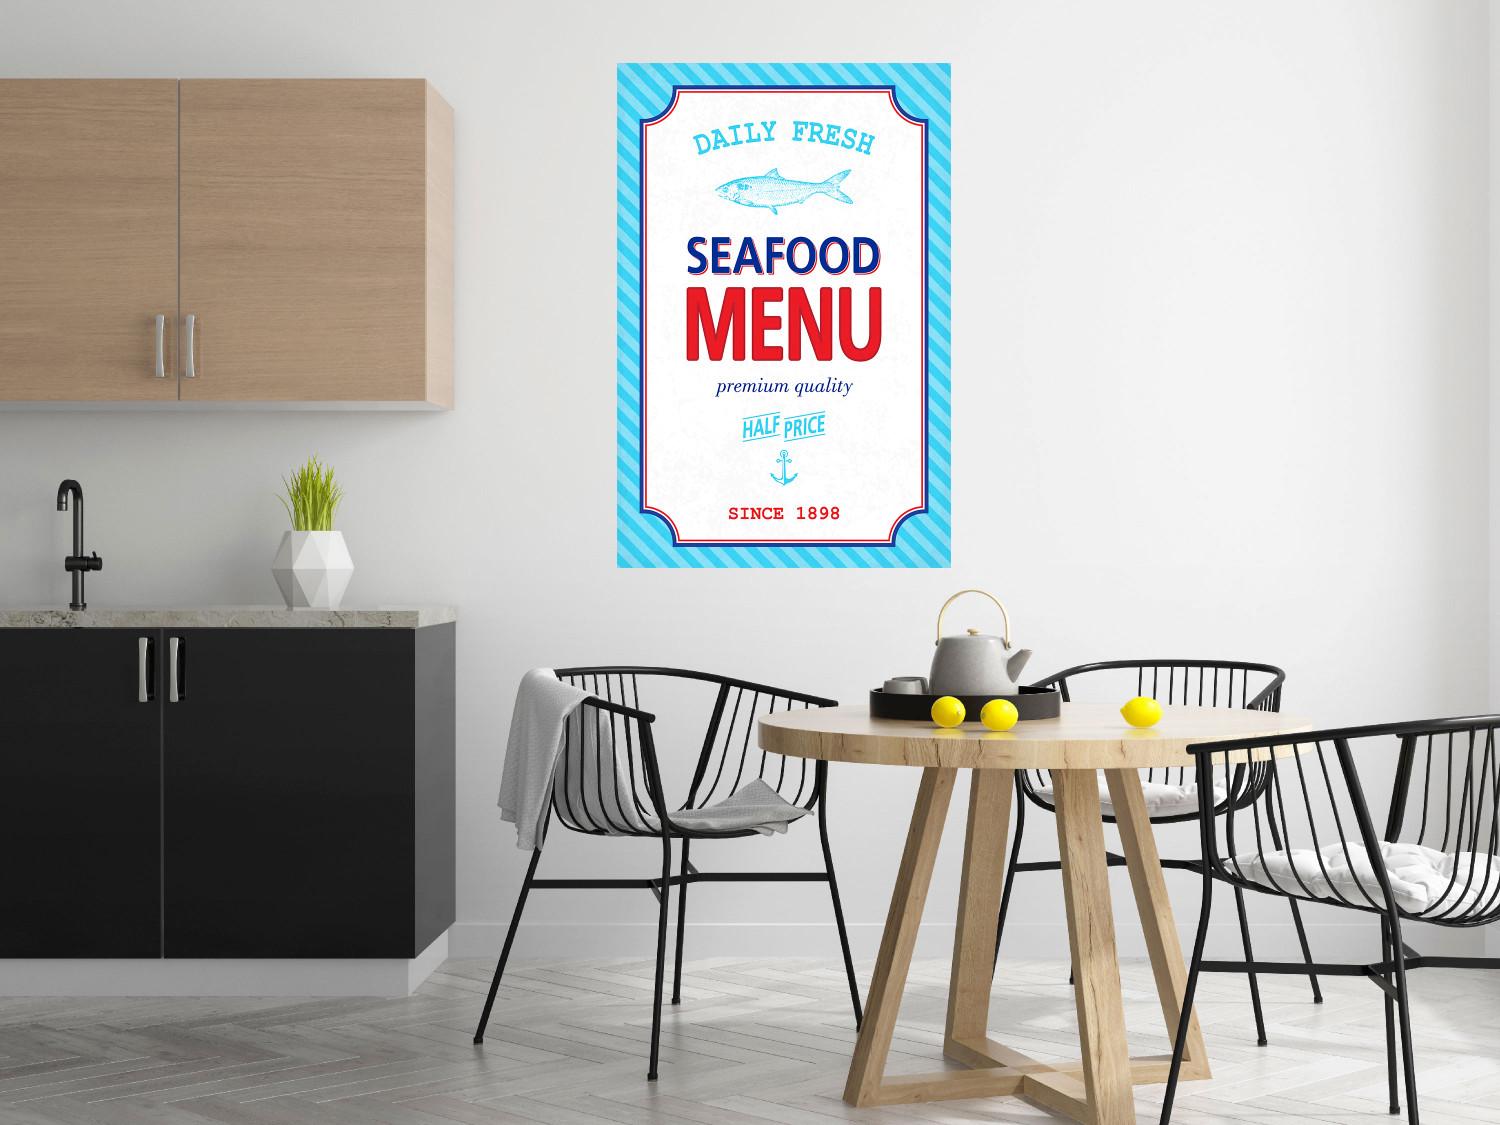 Poster Menu - blue advertising pattern with English captions and fish